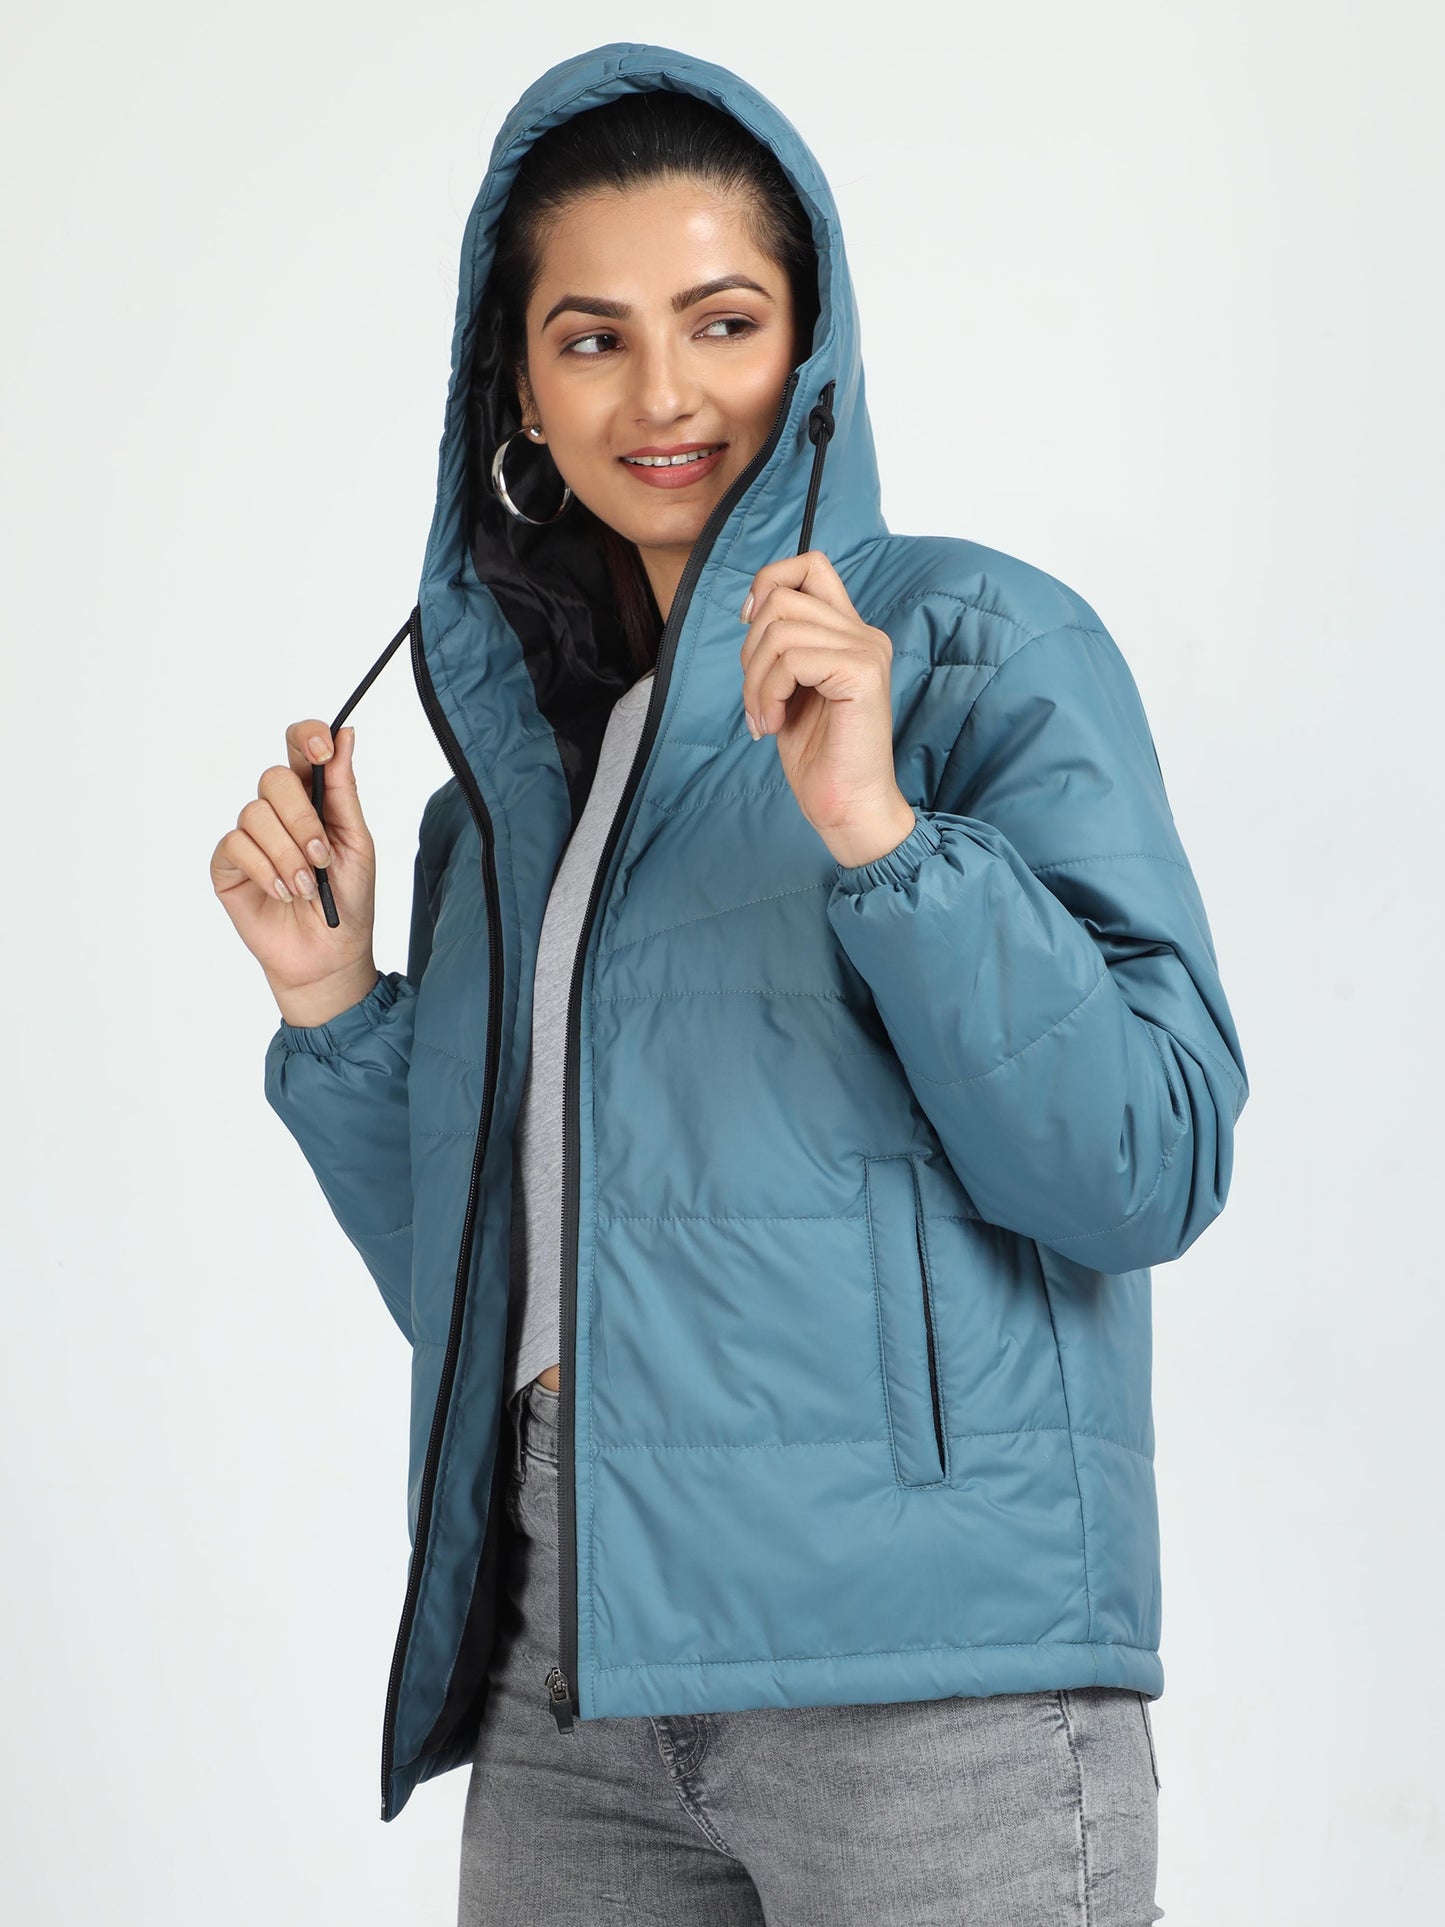 Women Air Force Blue Bomber Jacket with Hood